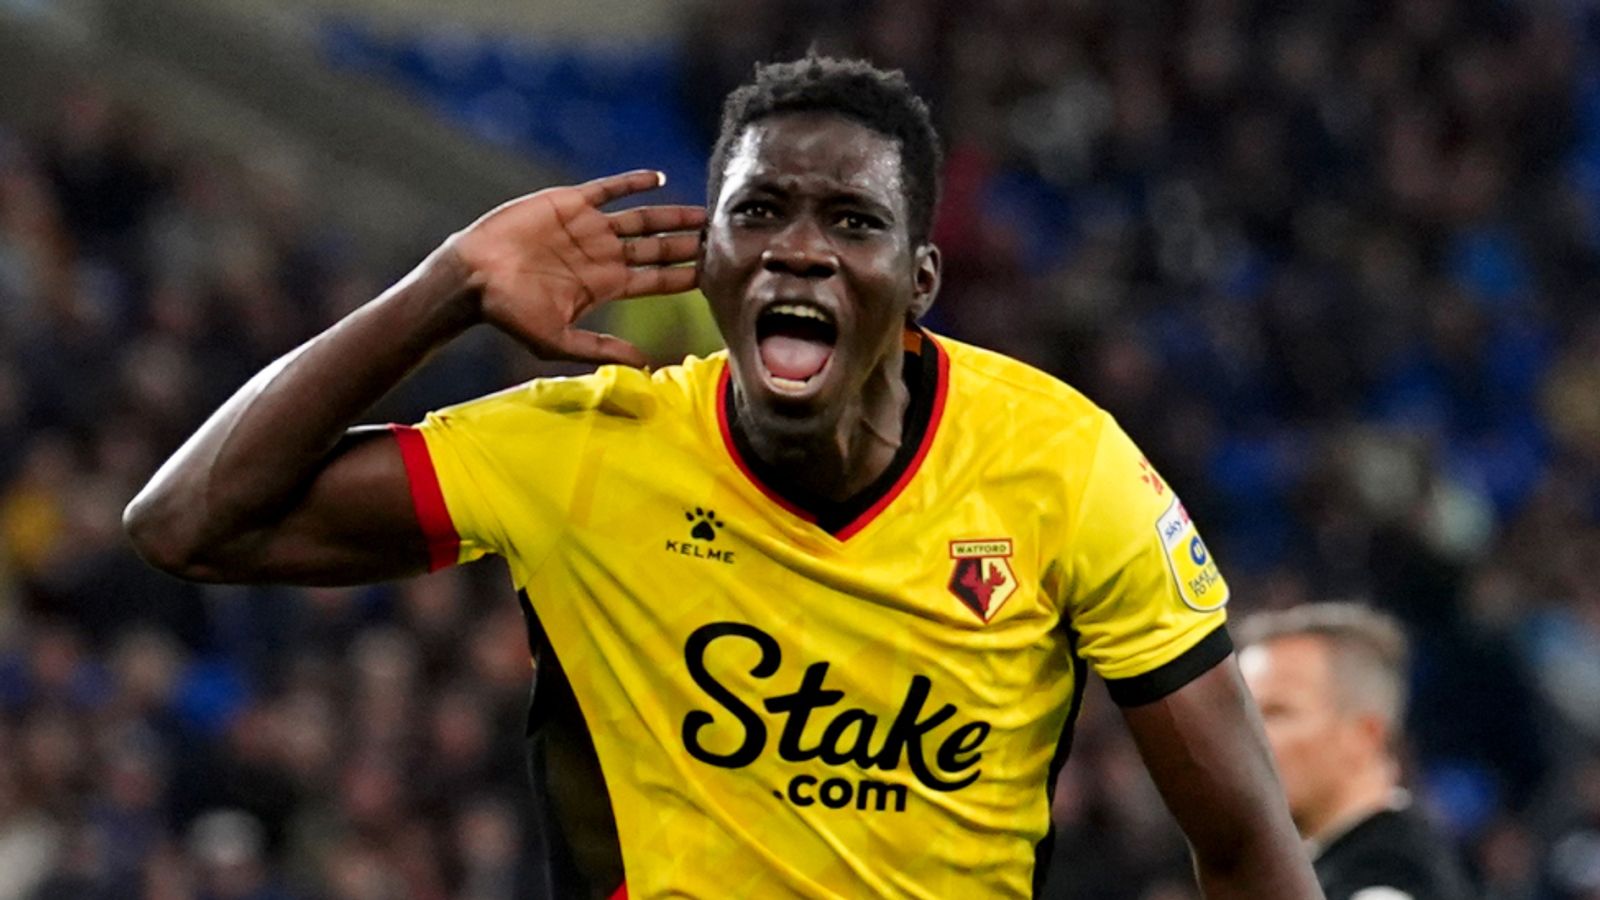 Watford 1-3 Cardiff: Bluebirds alleviate relegation fears with